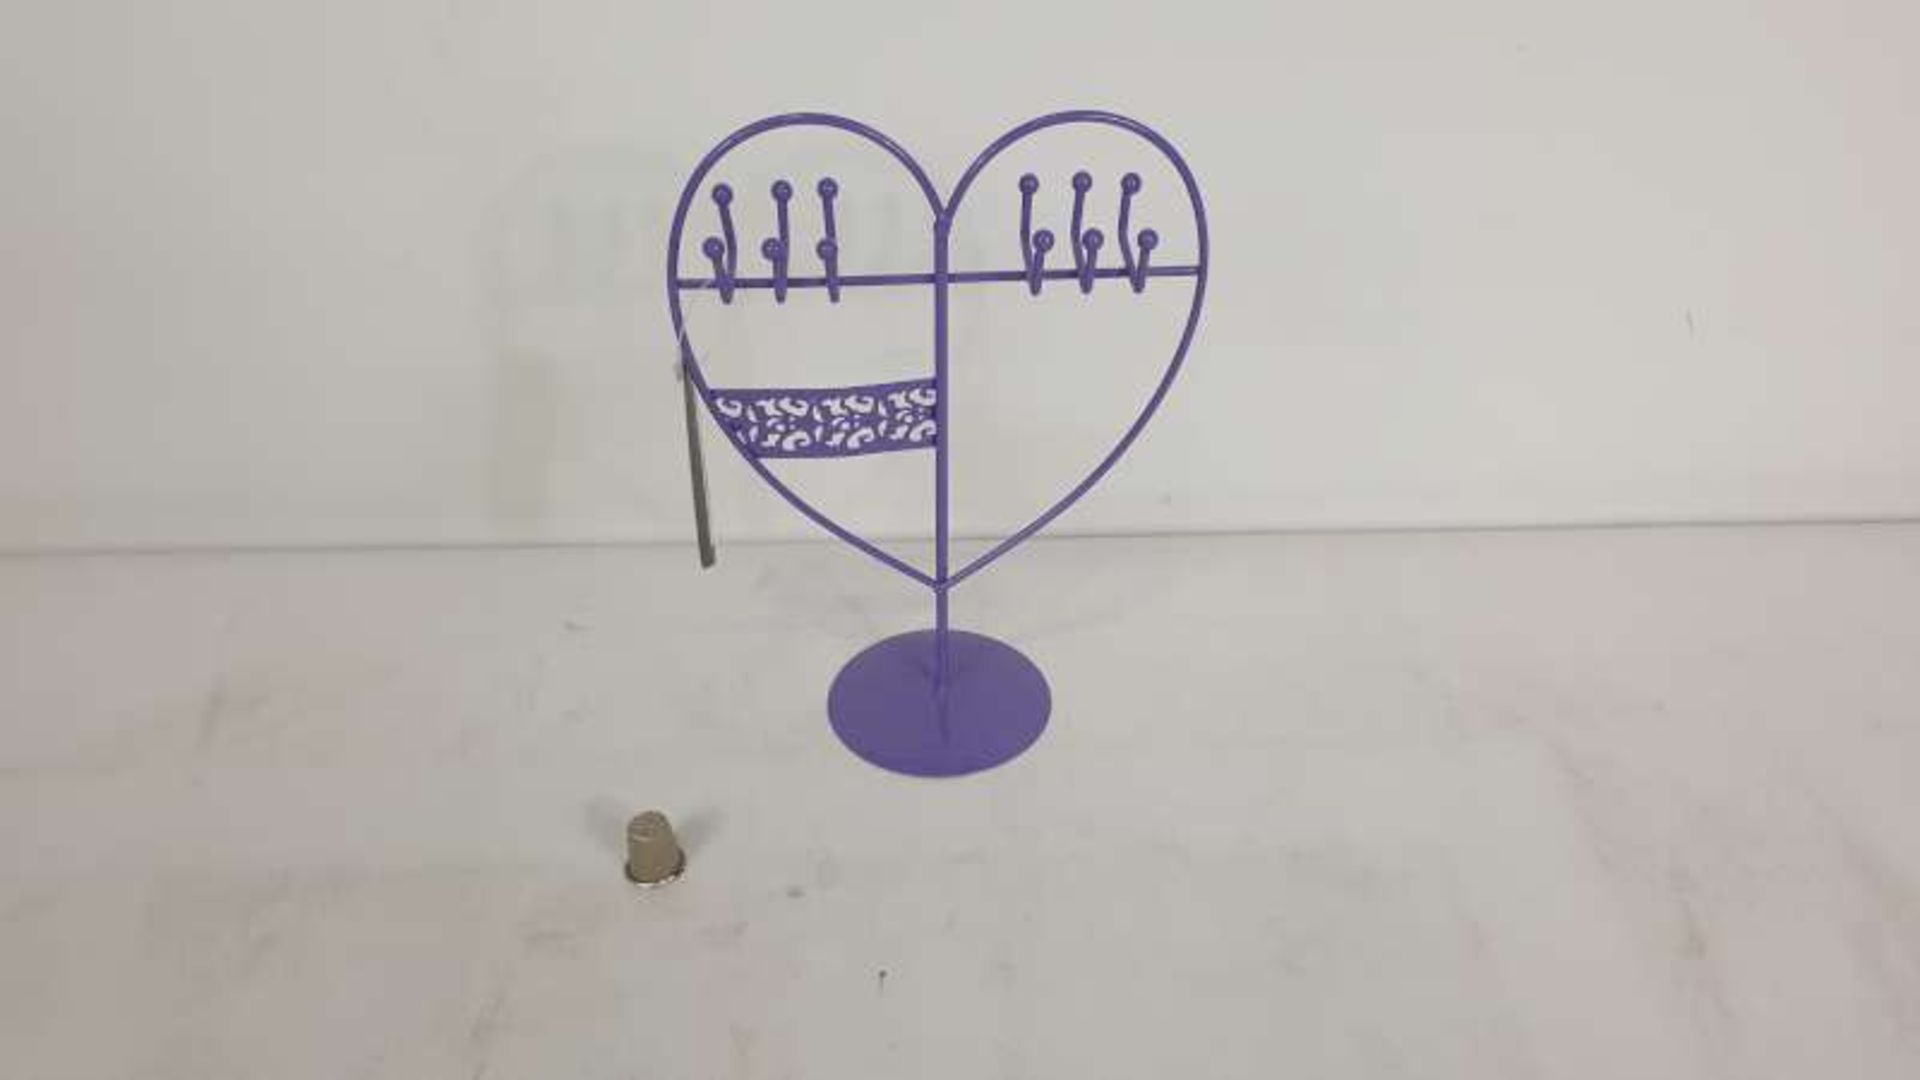 600 X HEART SHAPED JEWELLERY STANDS IN 25 BOXES